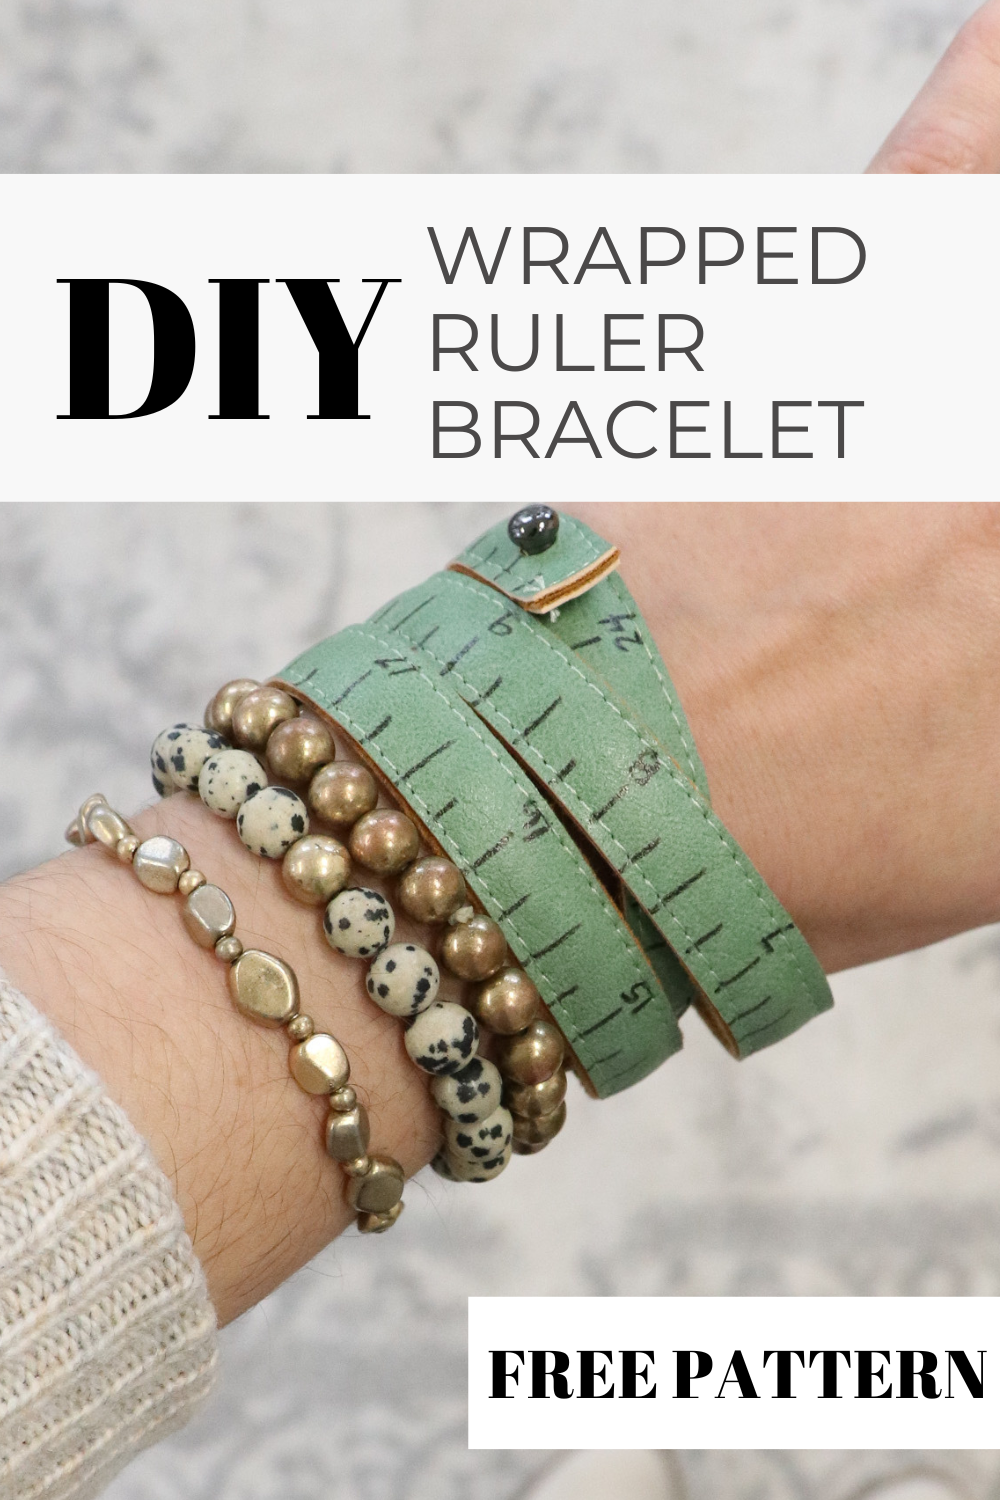 DIY Wrapped Ruler Bracelet from Faux Leather or Cork Fabric